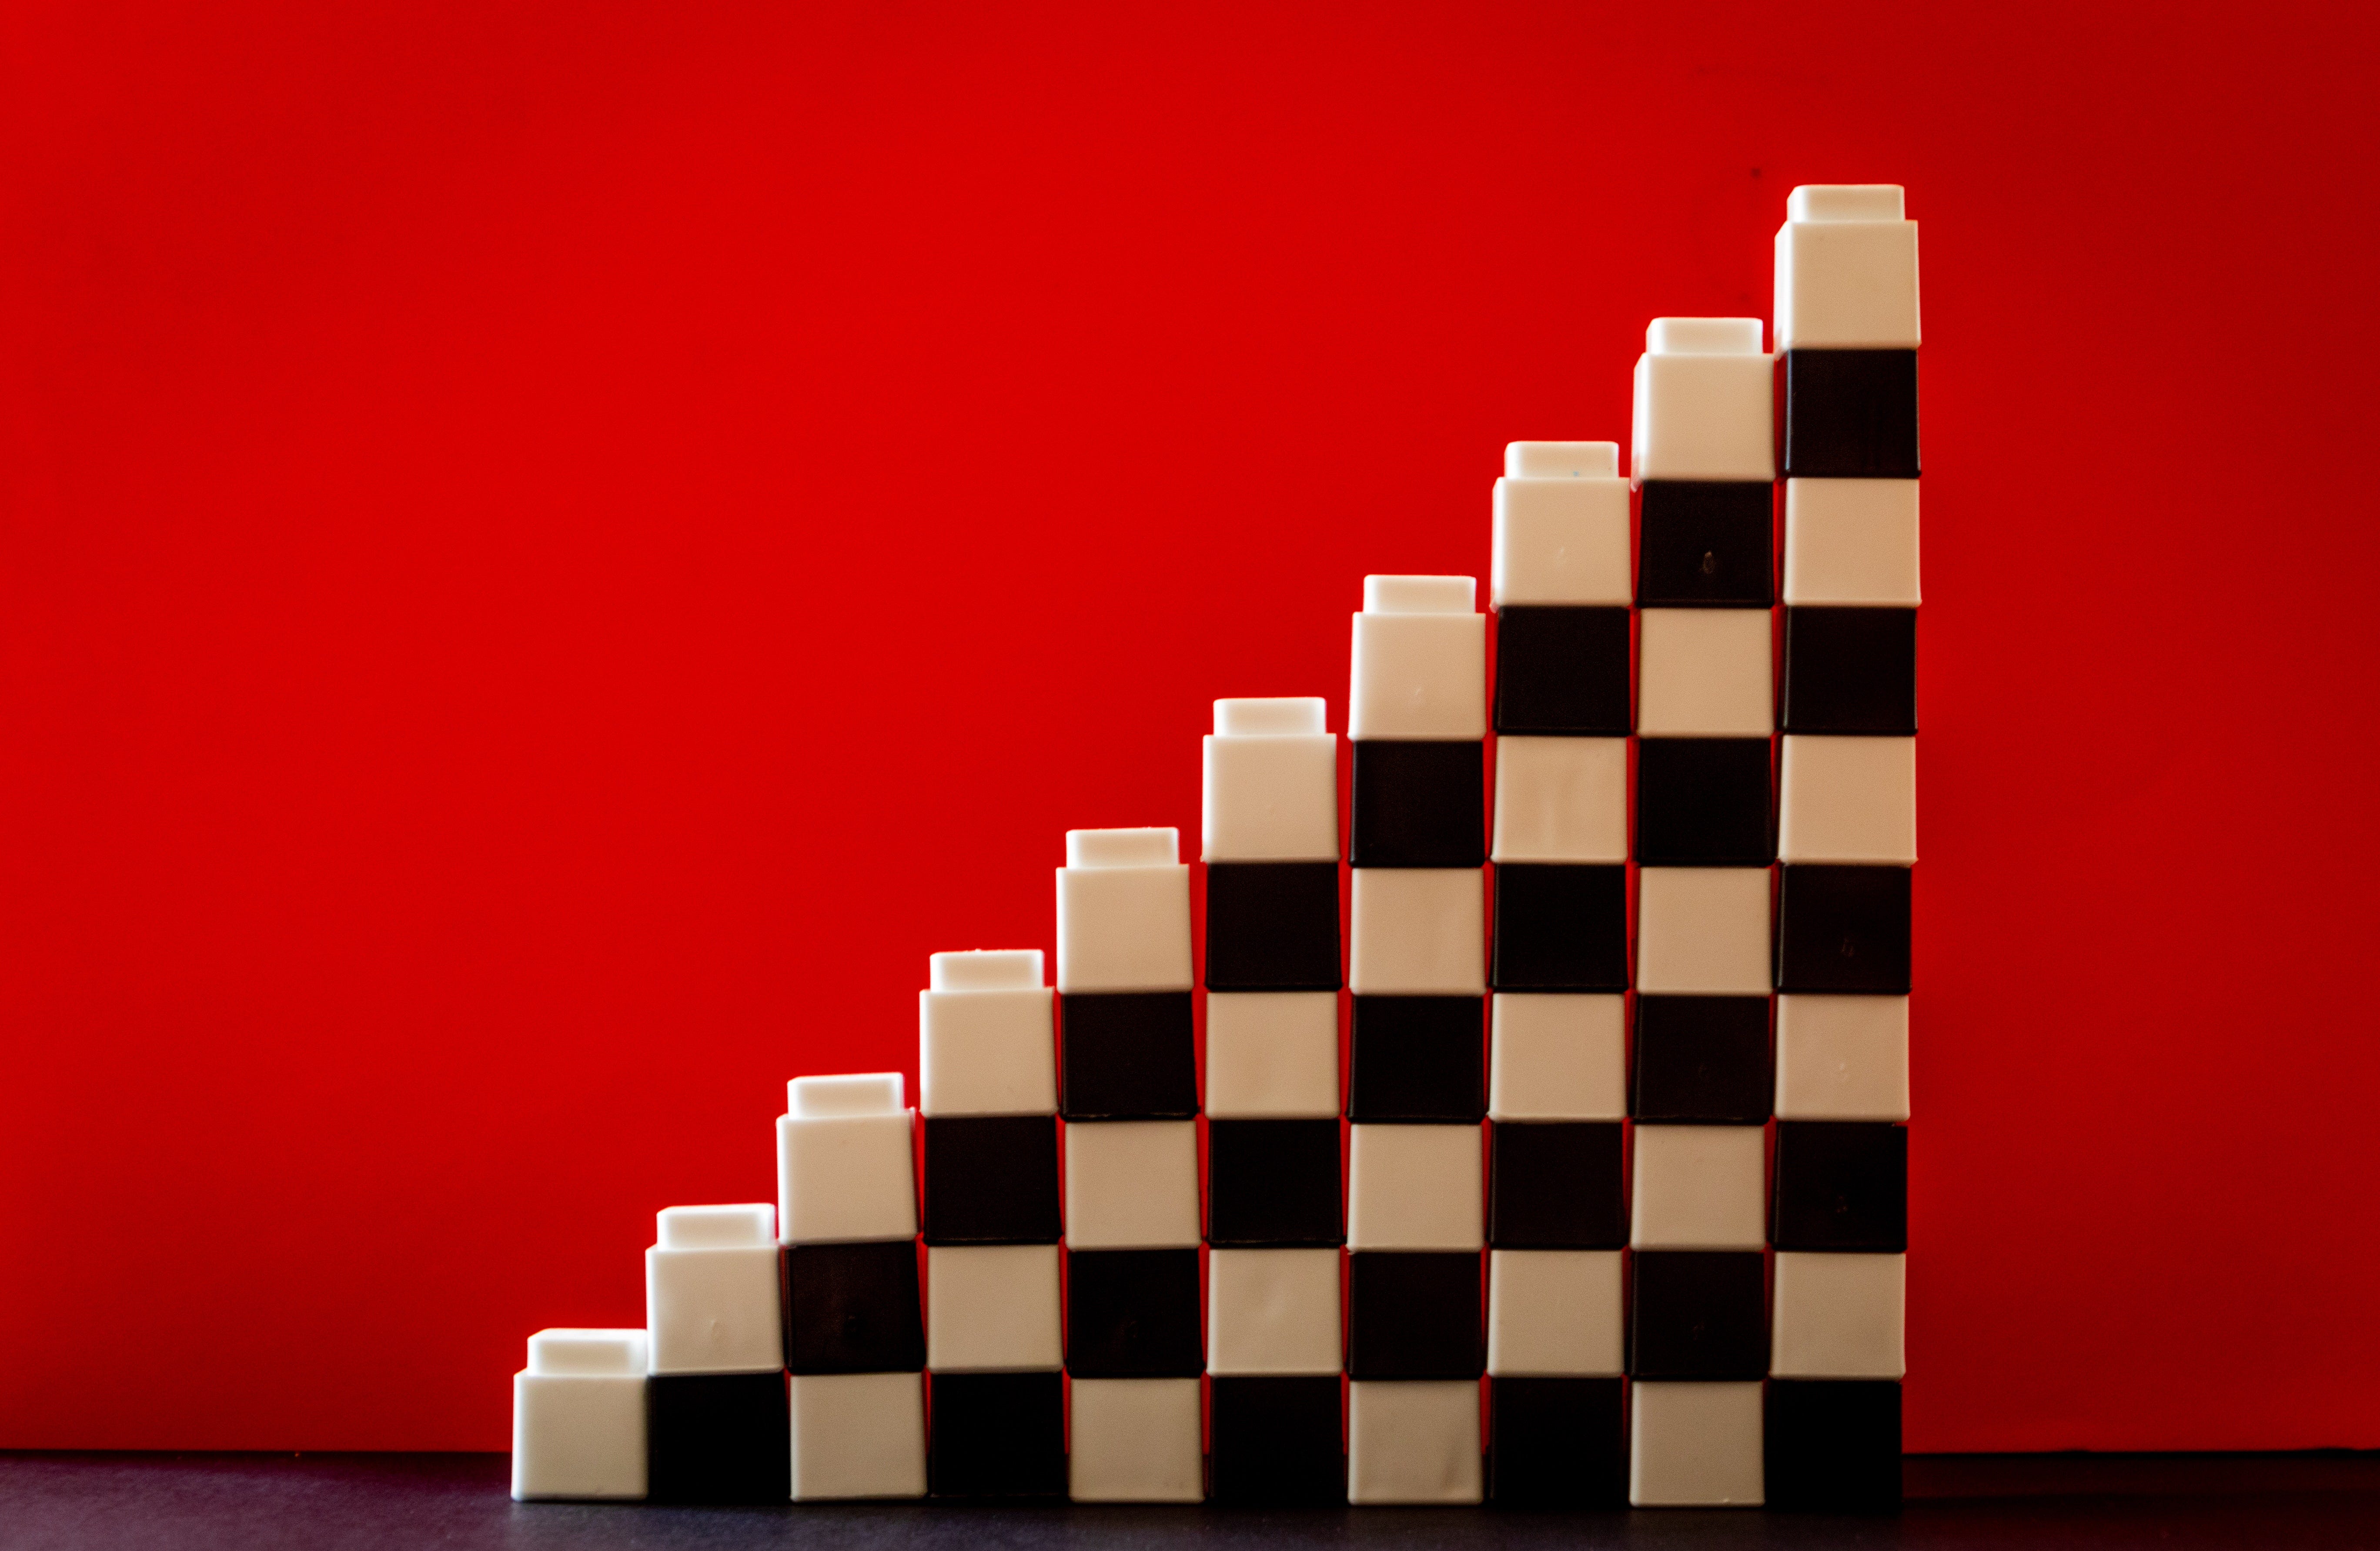 Black and white blocks are stacked on top of one another, forming stair steps.